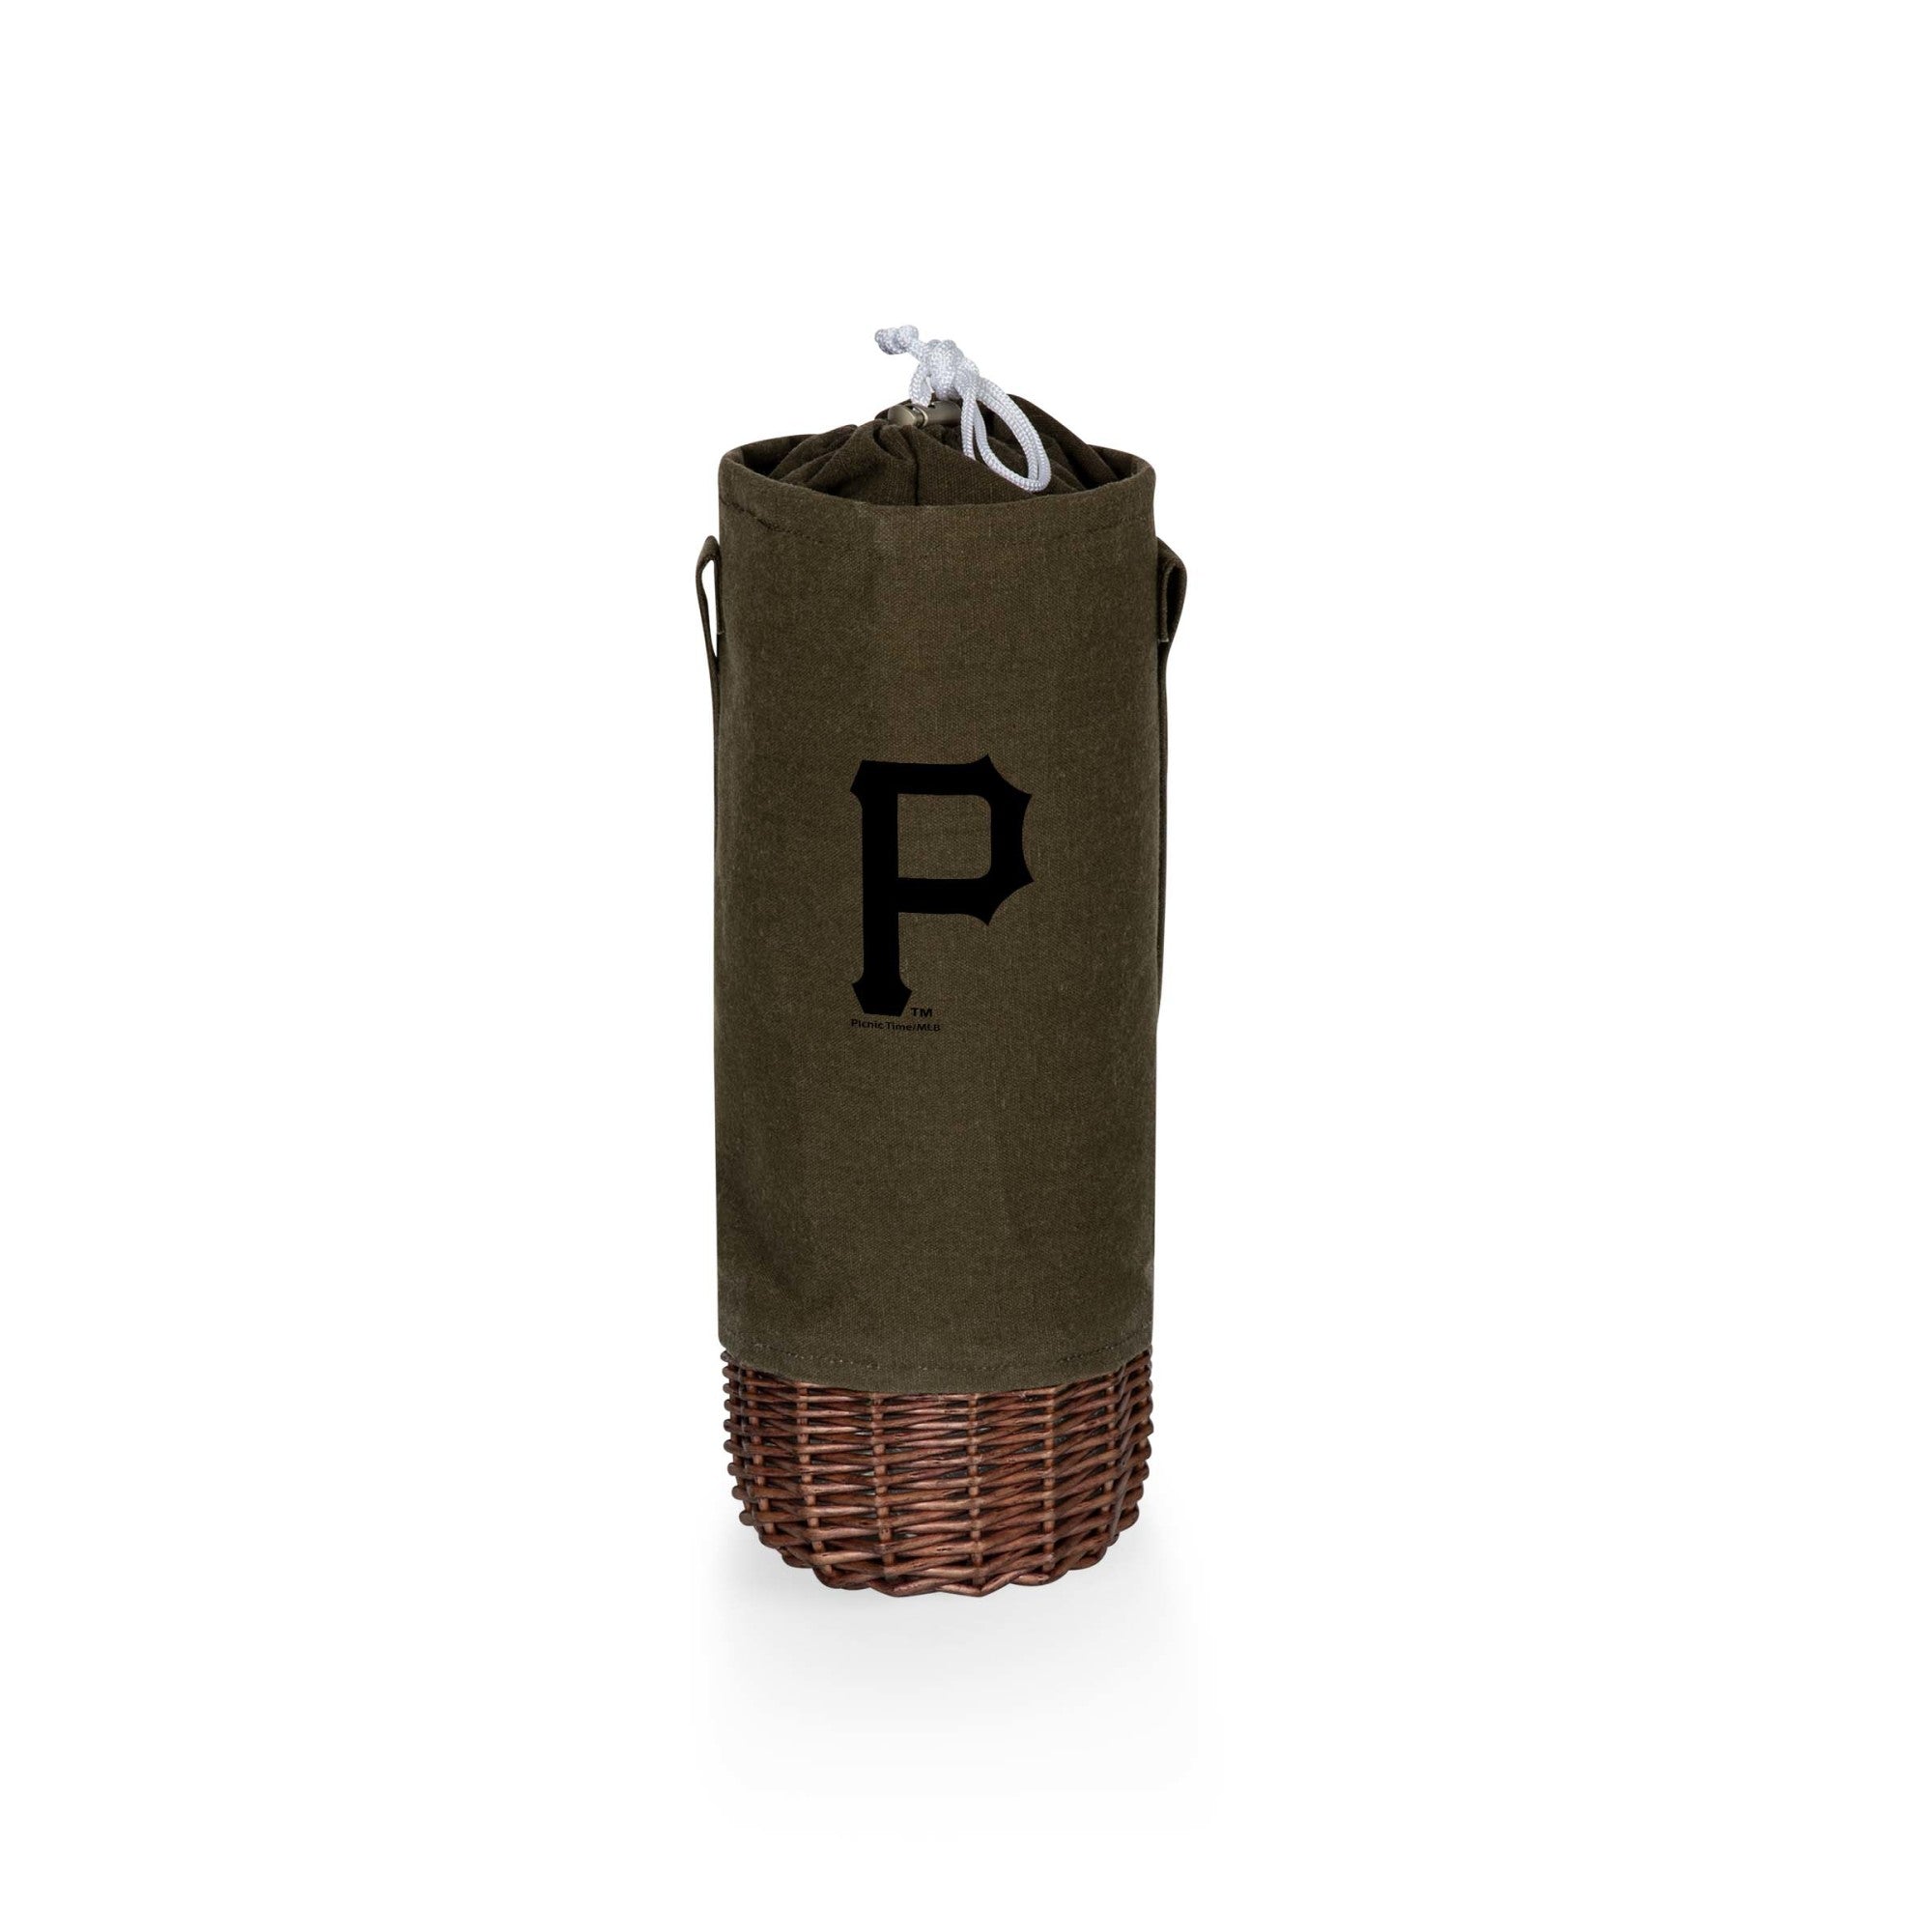 Pittsburgh Pirates - Malbec Insulated Canvas and Willow Wine Bottle Basket